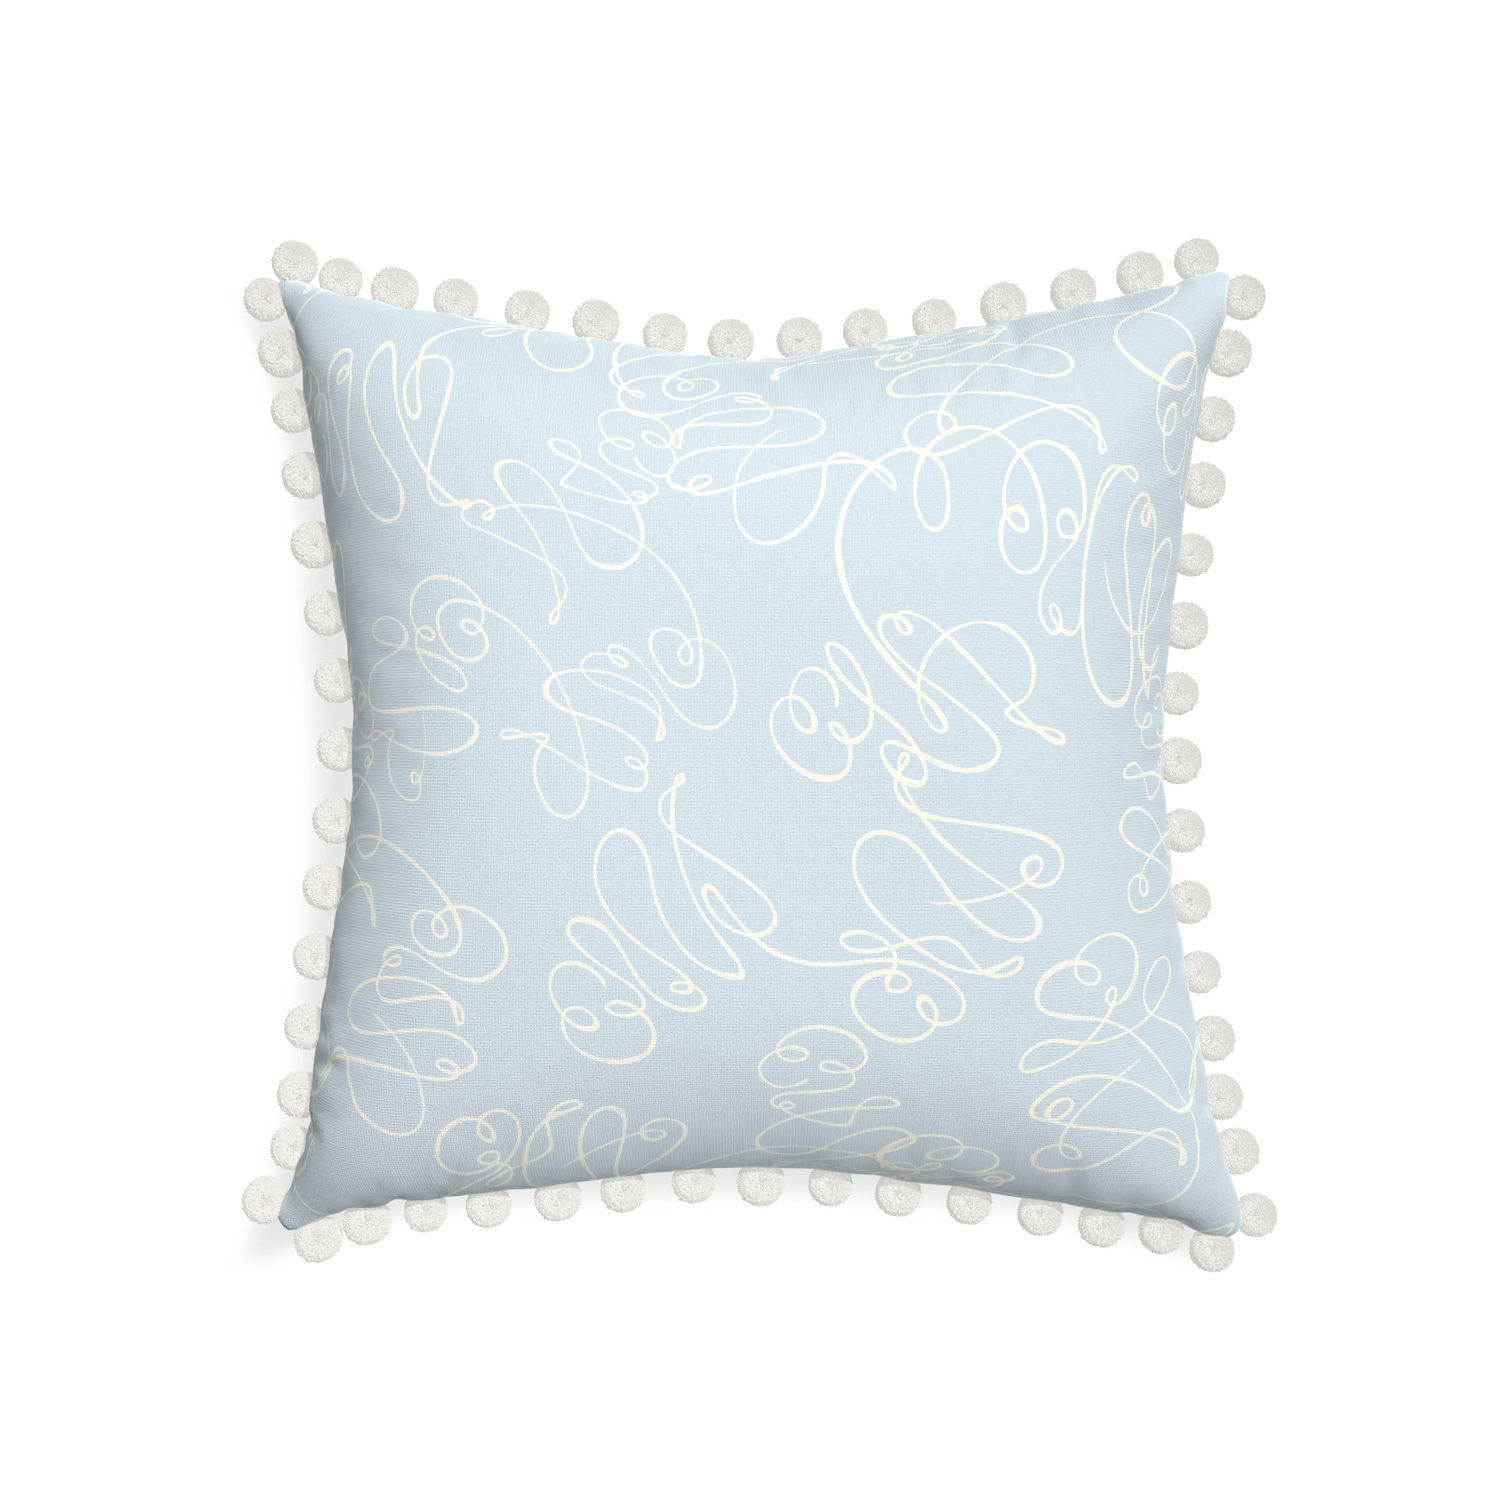 22-square mirabella custom pillow with snow pom pom on white background